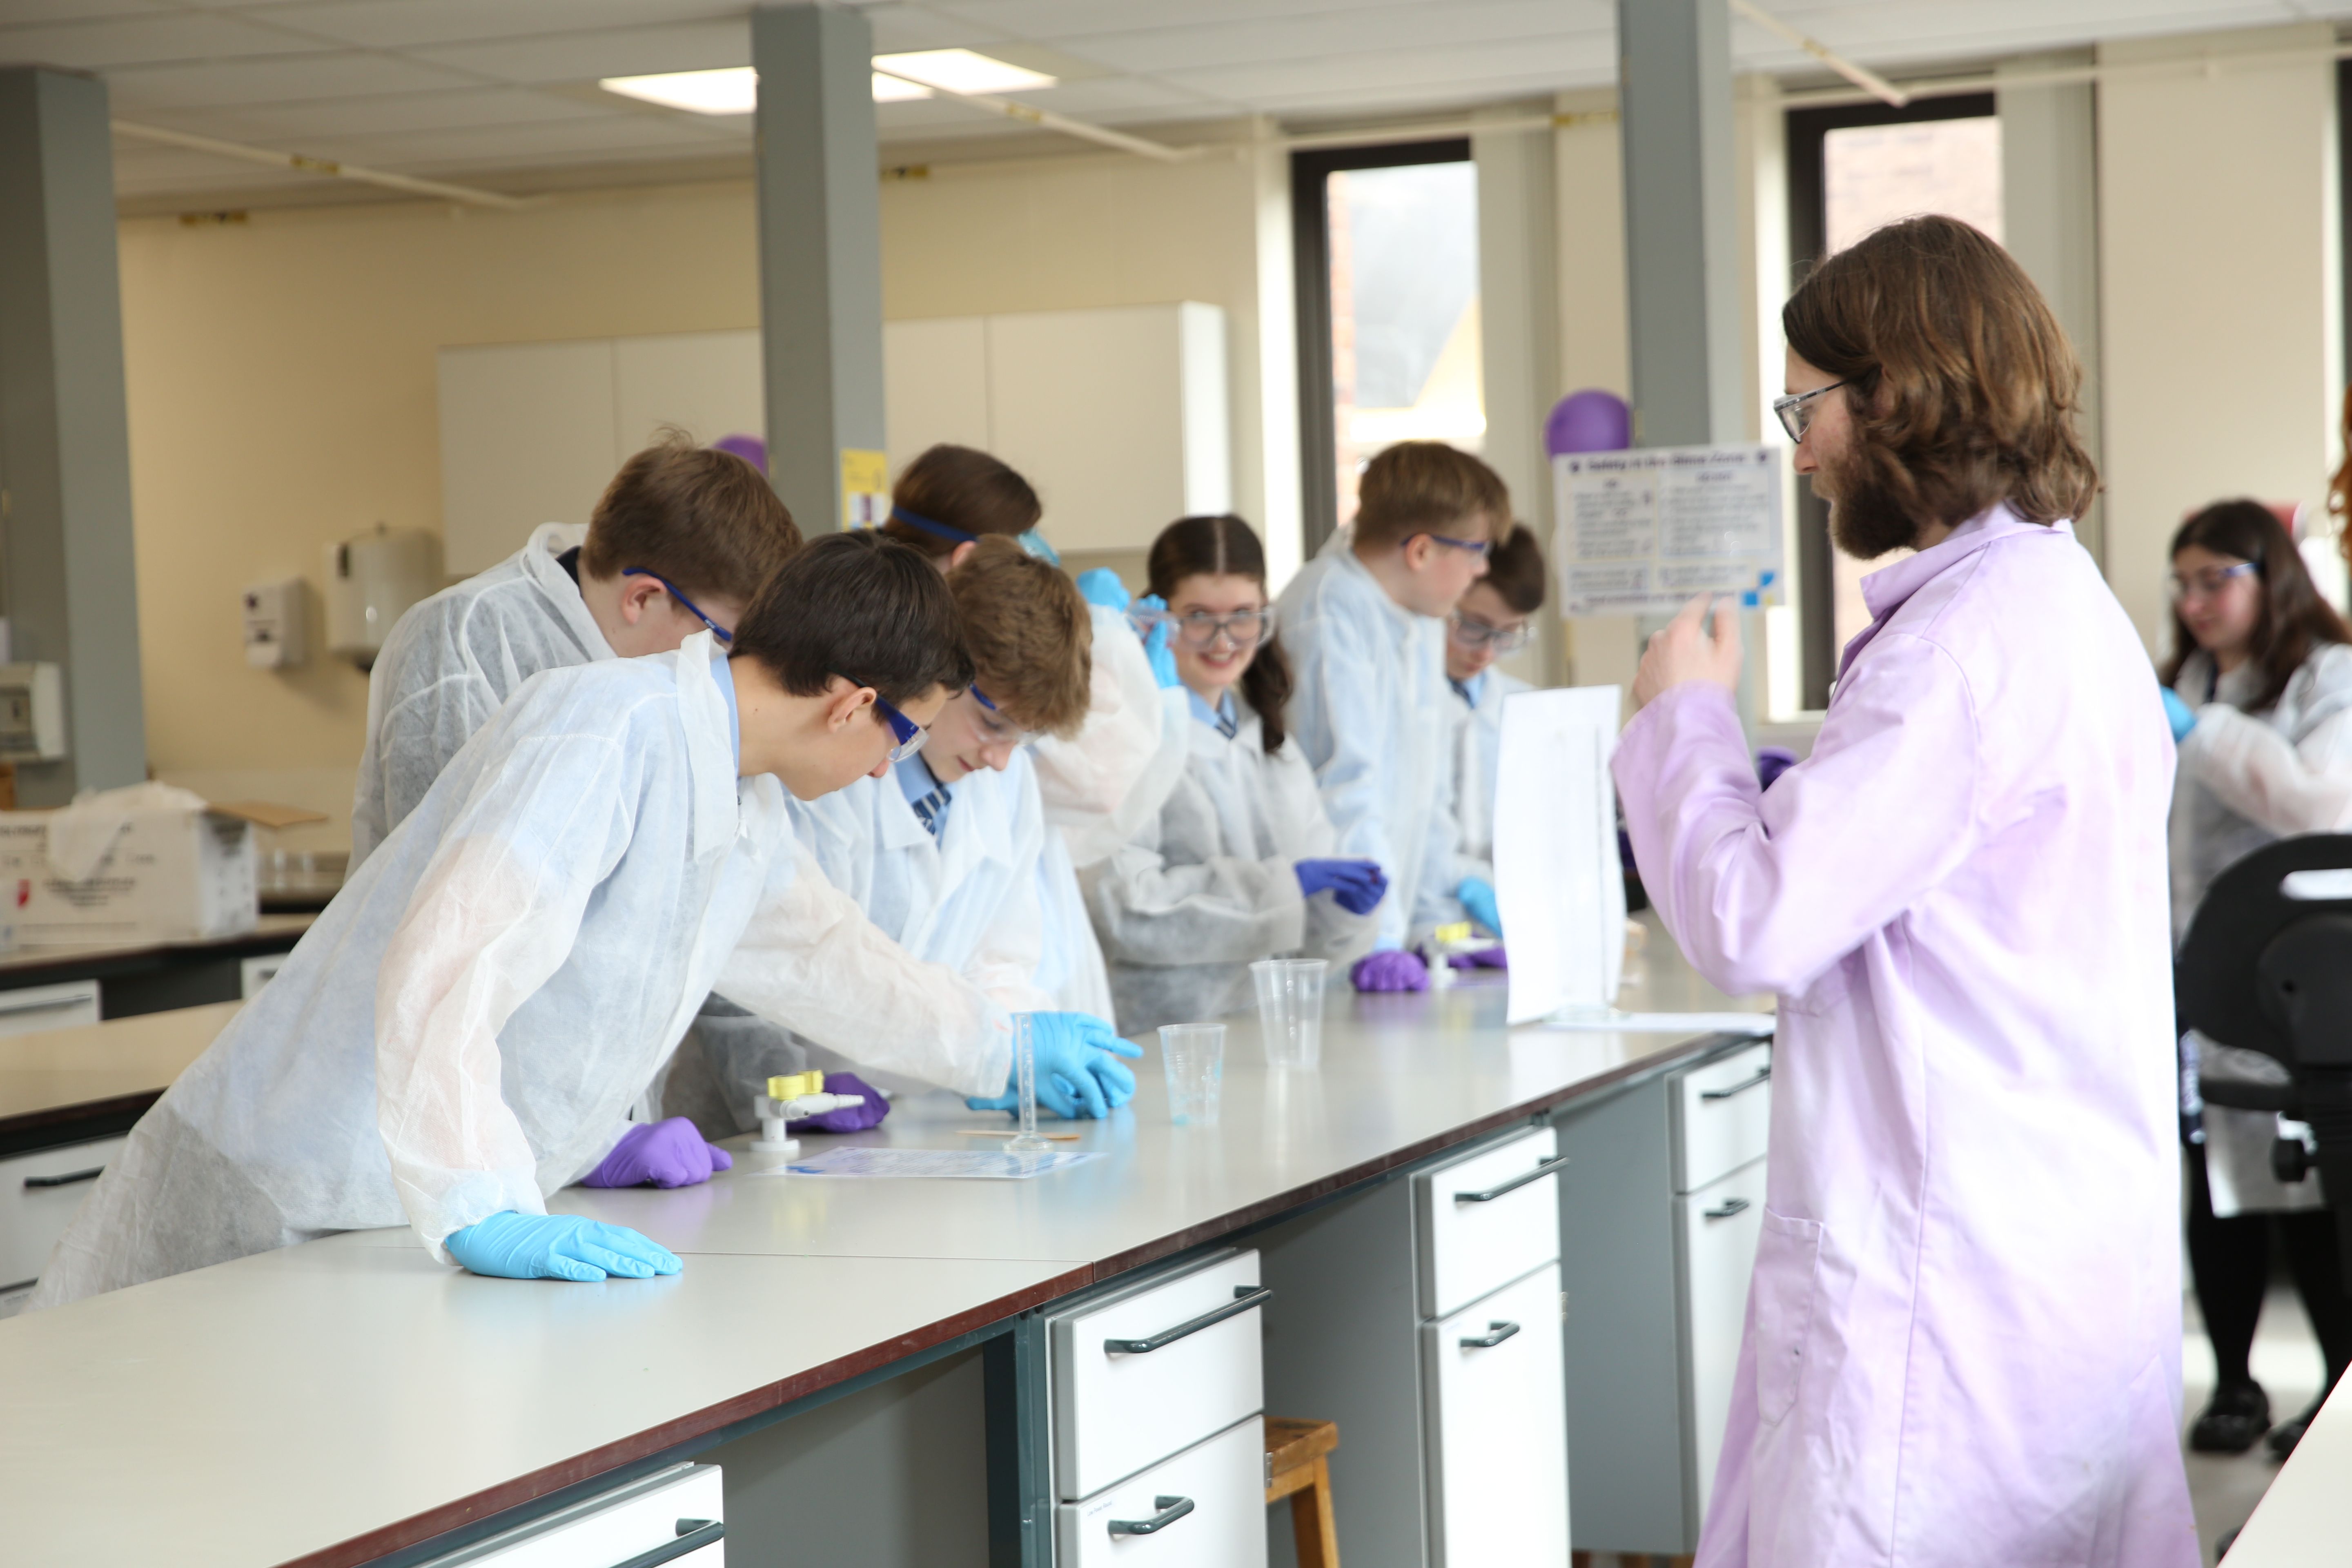 Group of teenage students in lab coats with tutor in lab coat doing a lab bench based science experiment